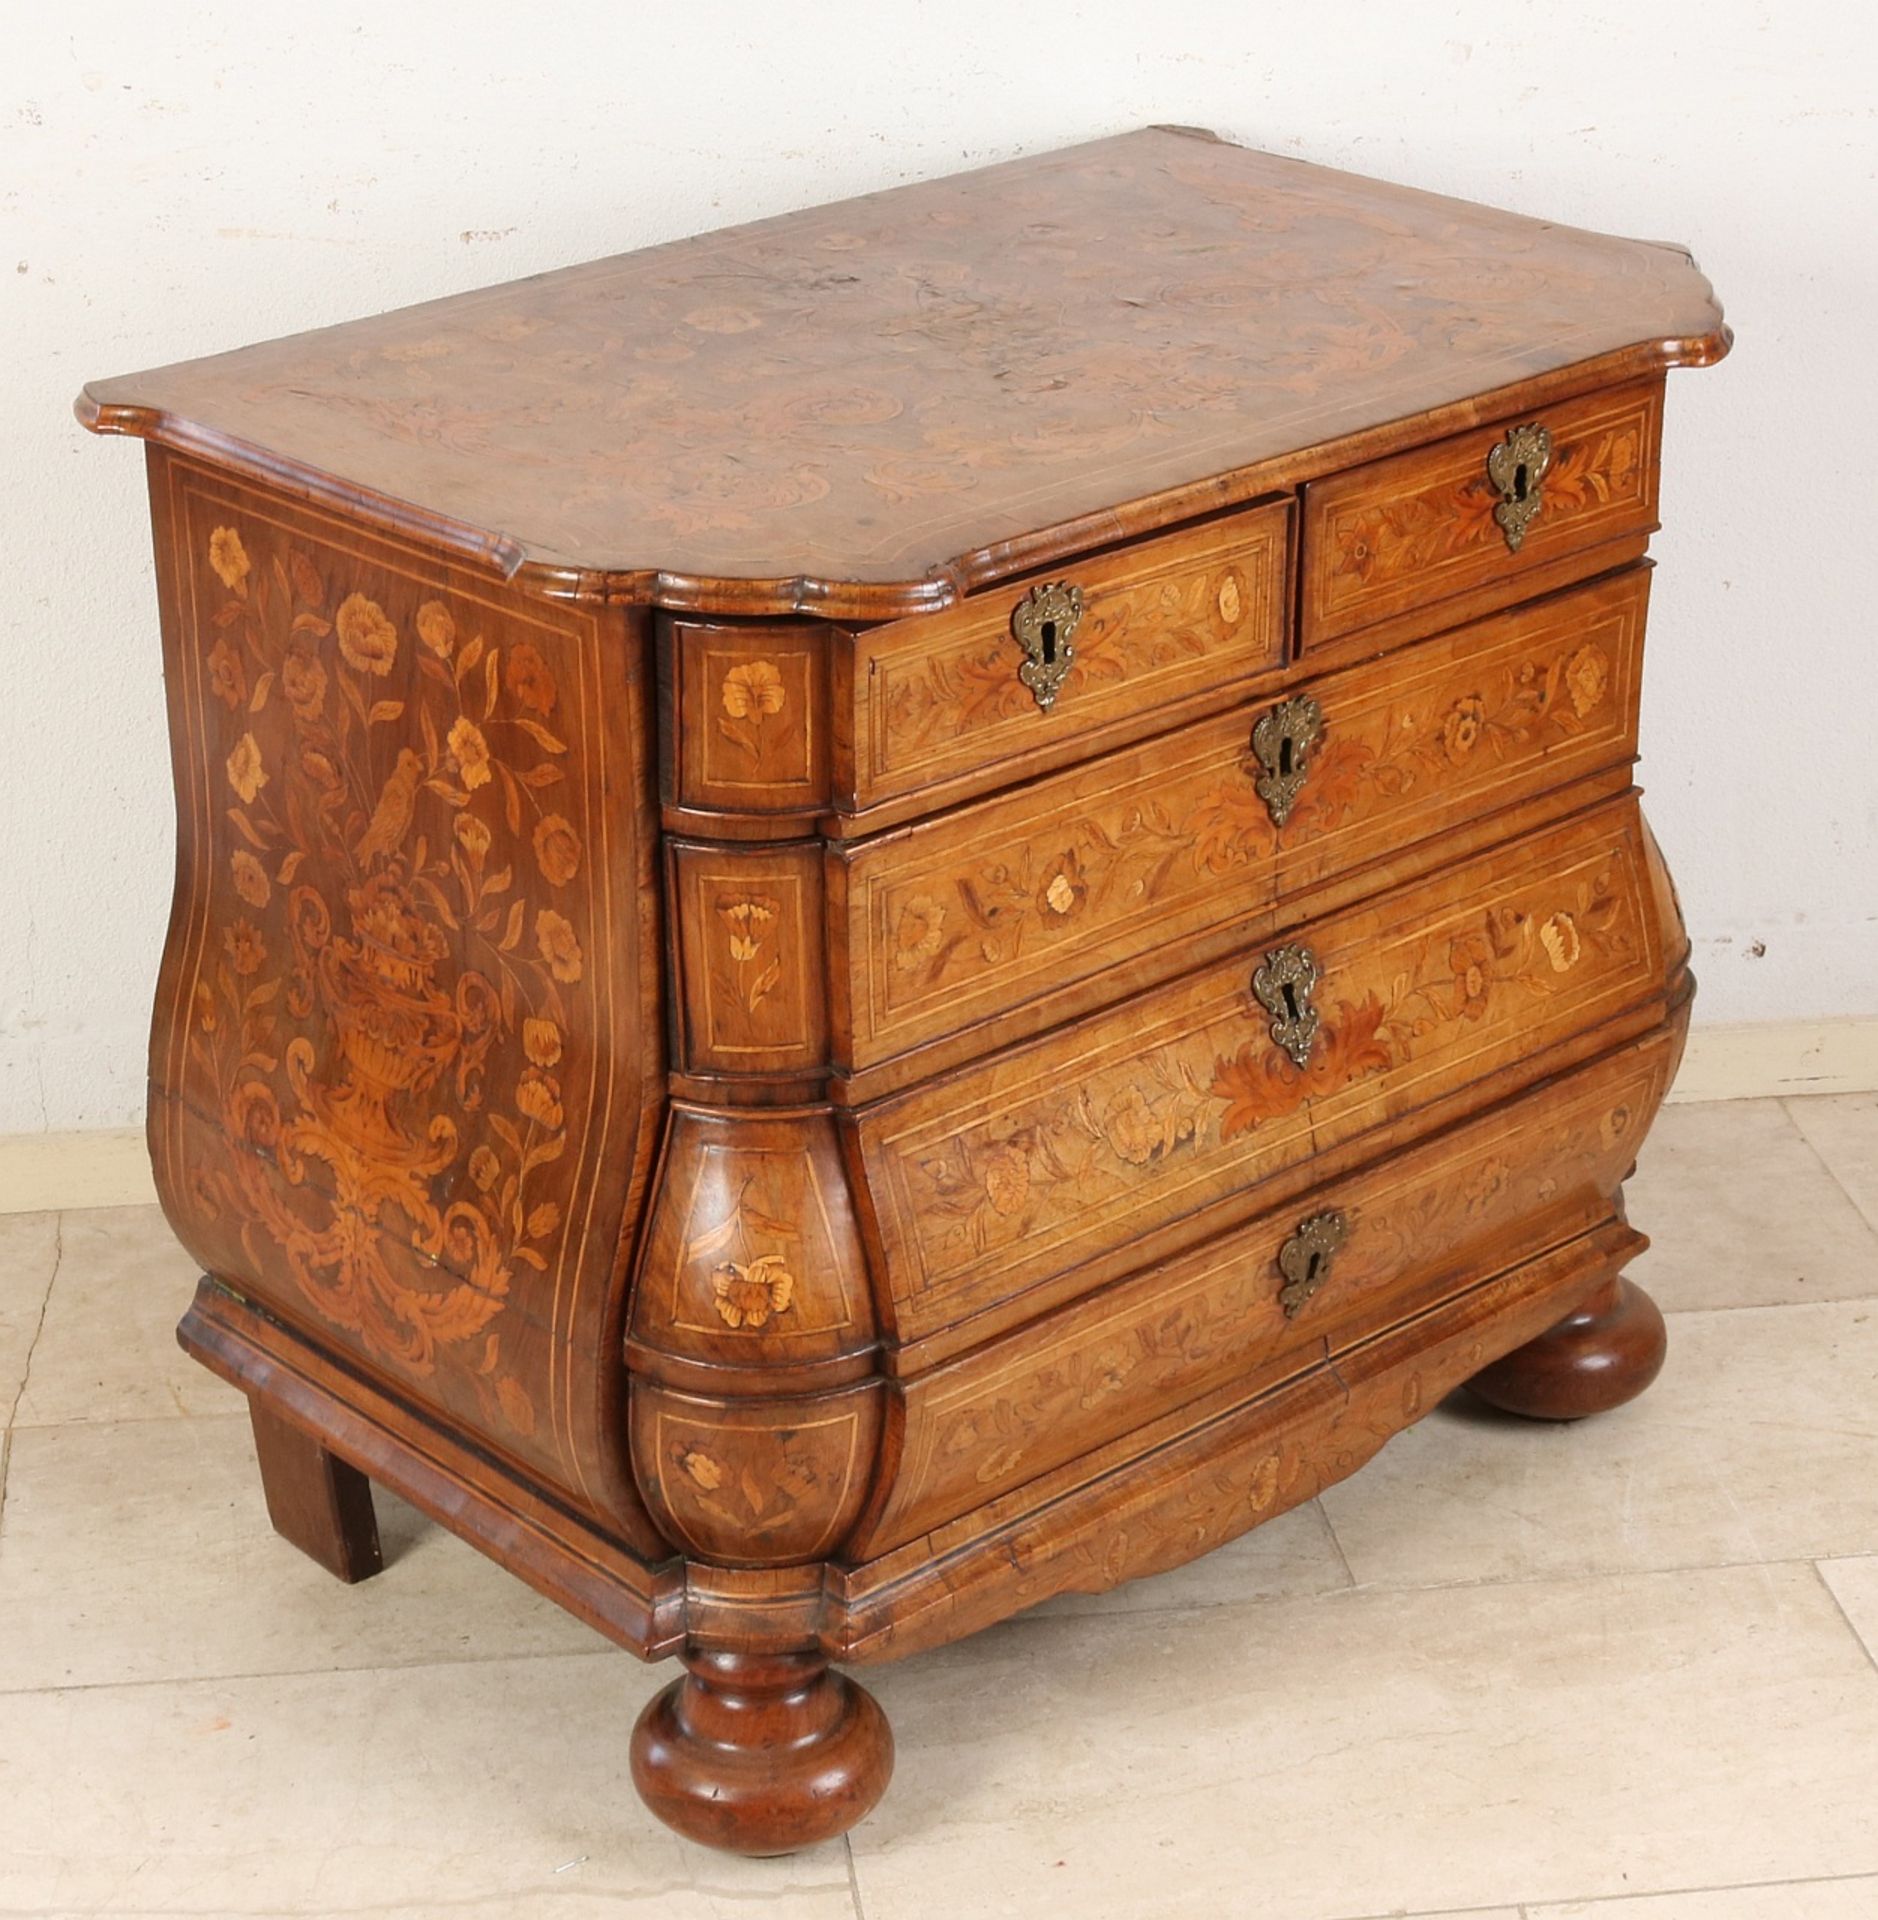 Marquetry inlaid chest of drawers - Image 2 of 2